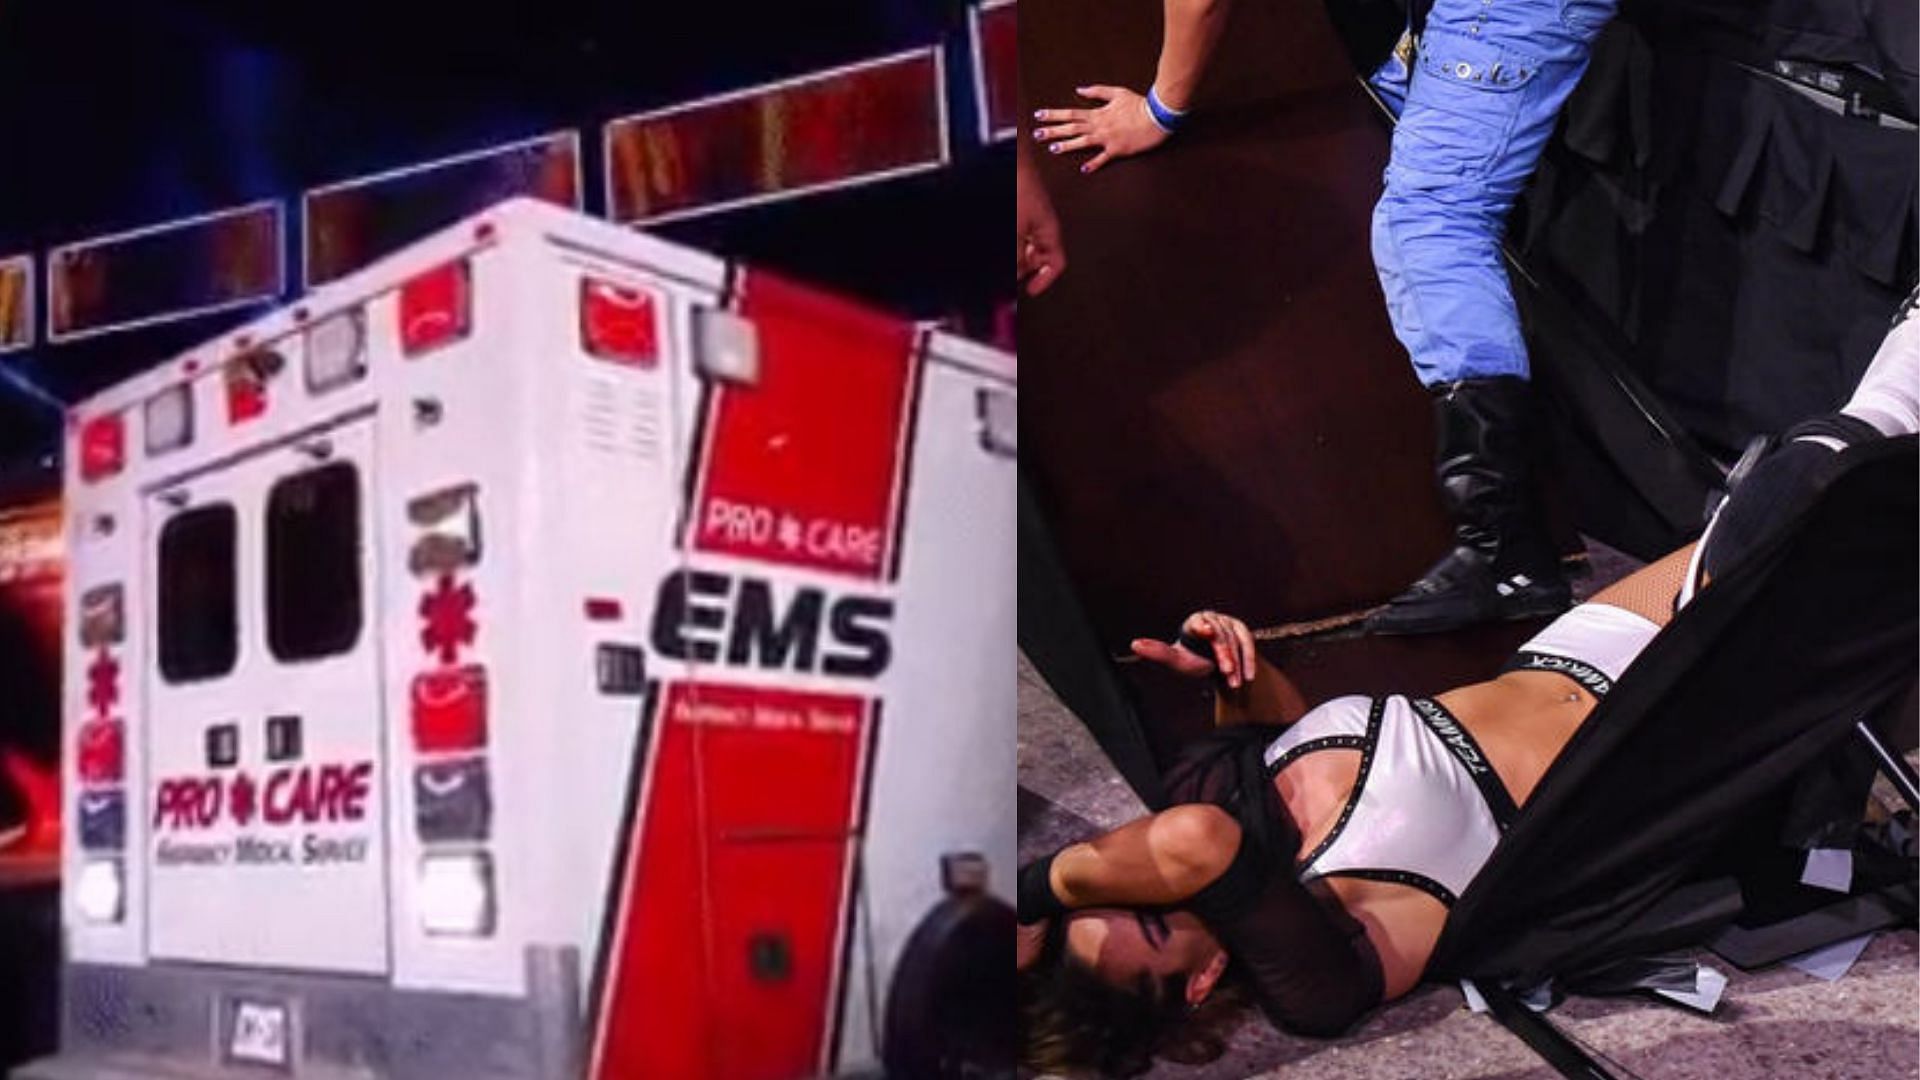 The WWE star was injured on SmackDown